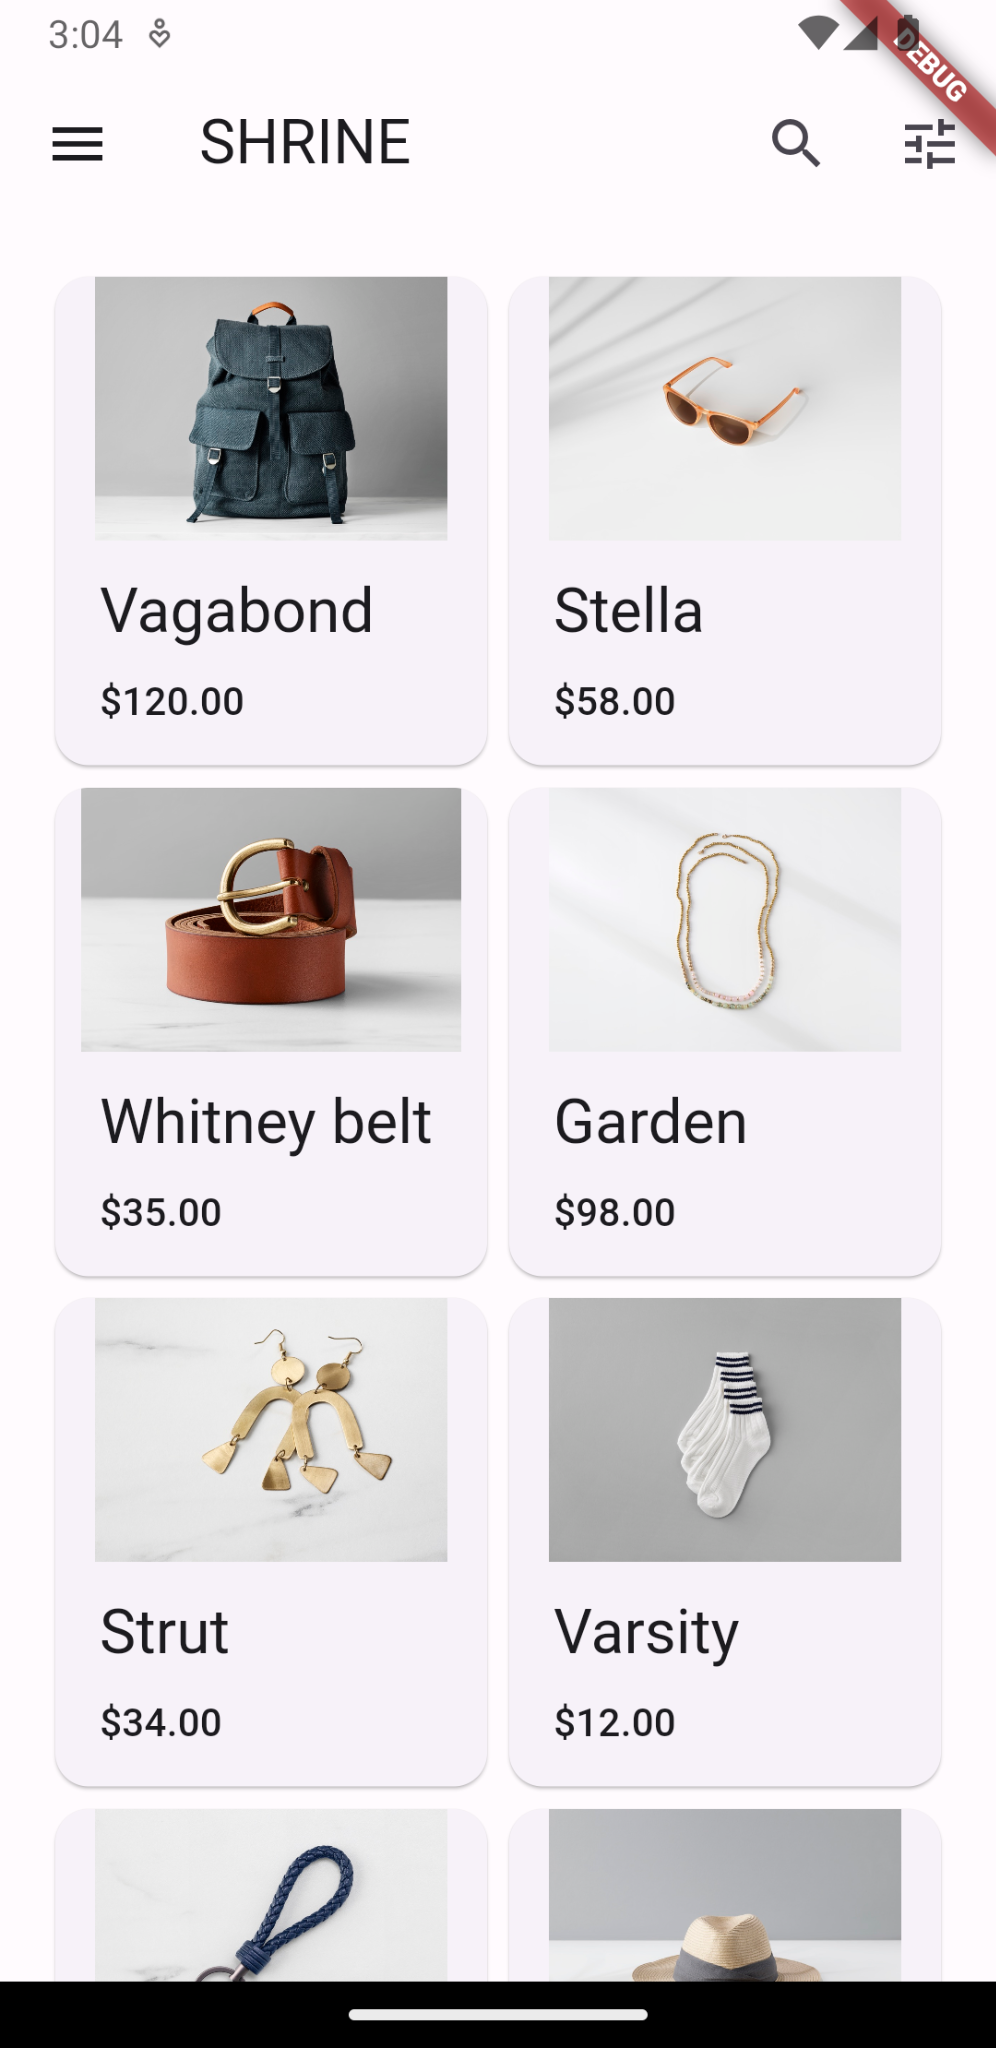 a grid of items with an image, product title, and price